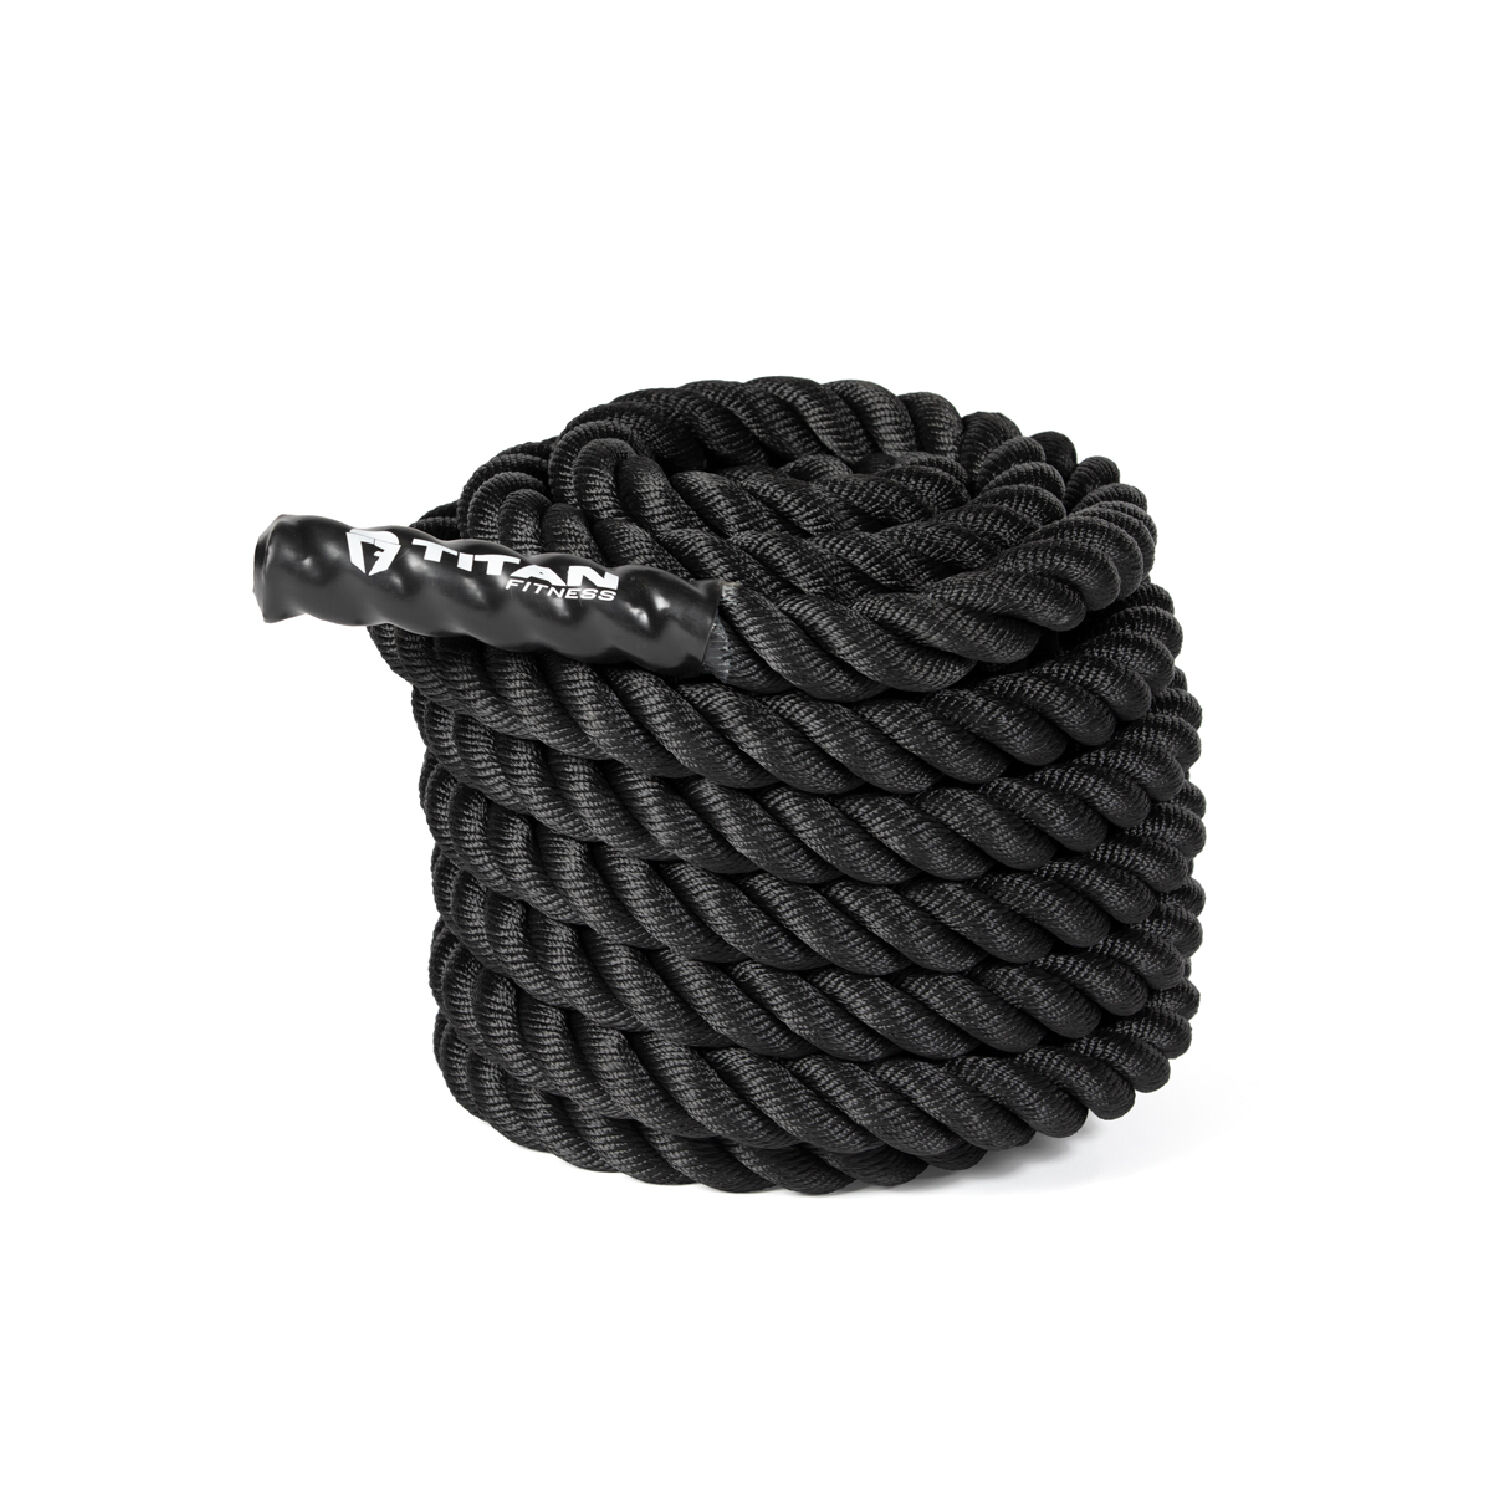 Ader 40 ft x 2" Poly Cross Training Battle Rope PTR-50X40 